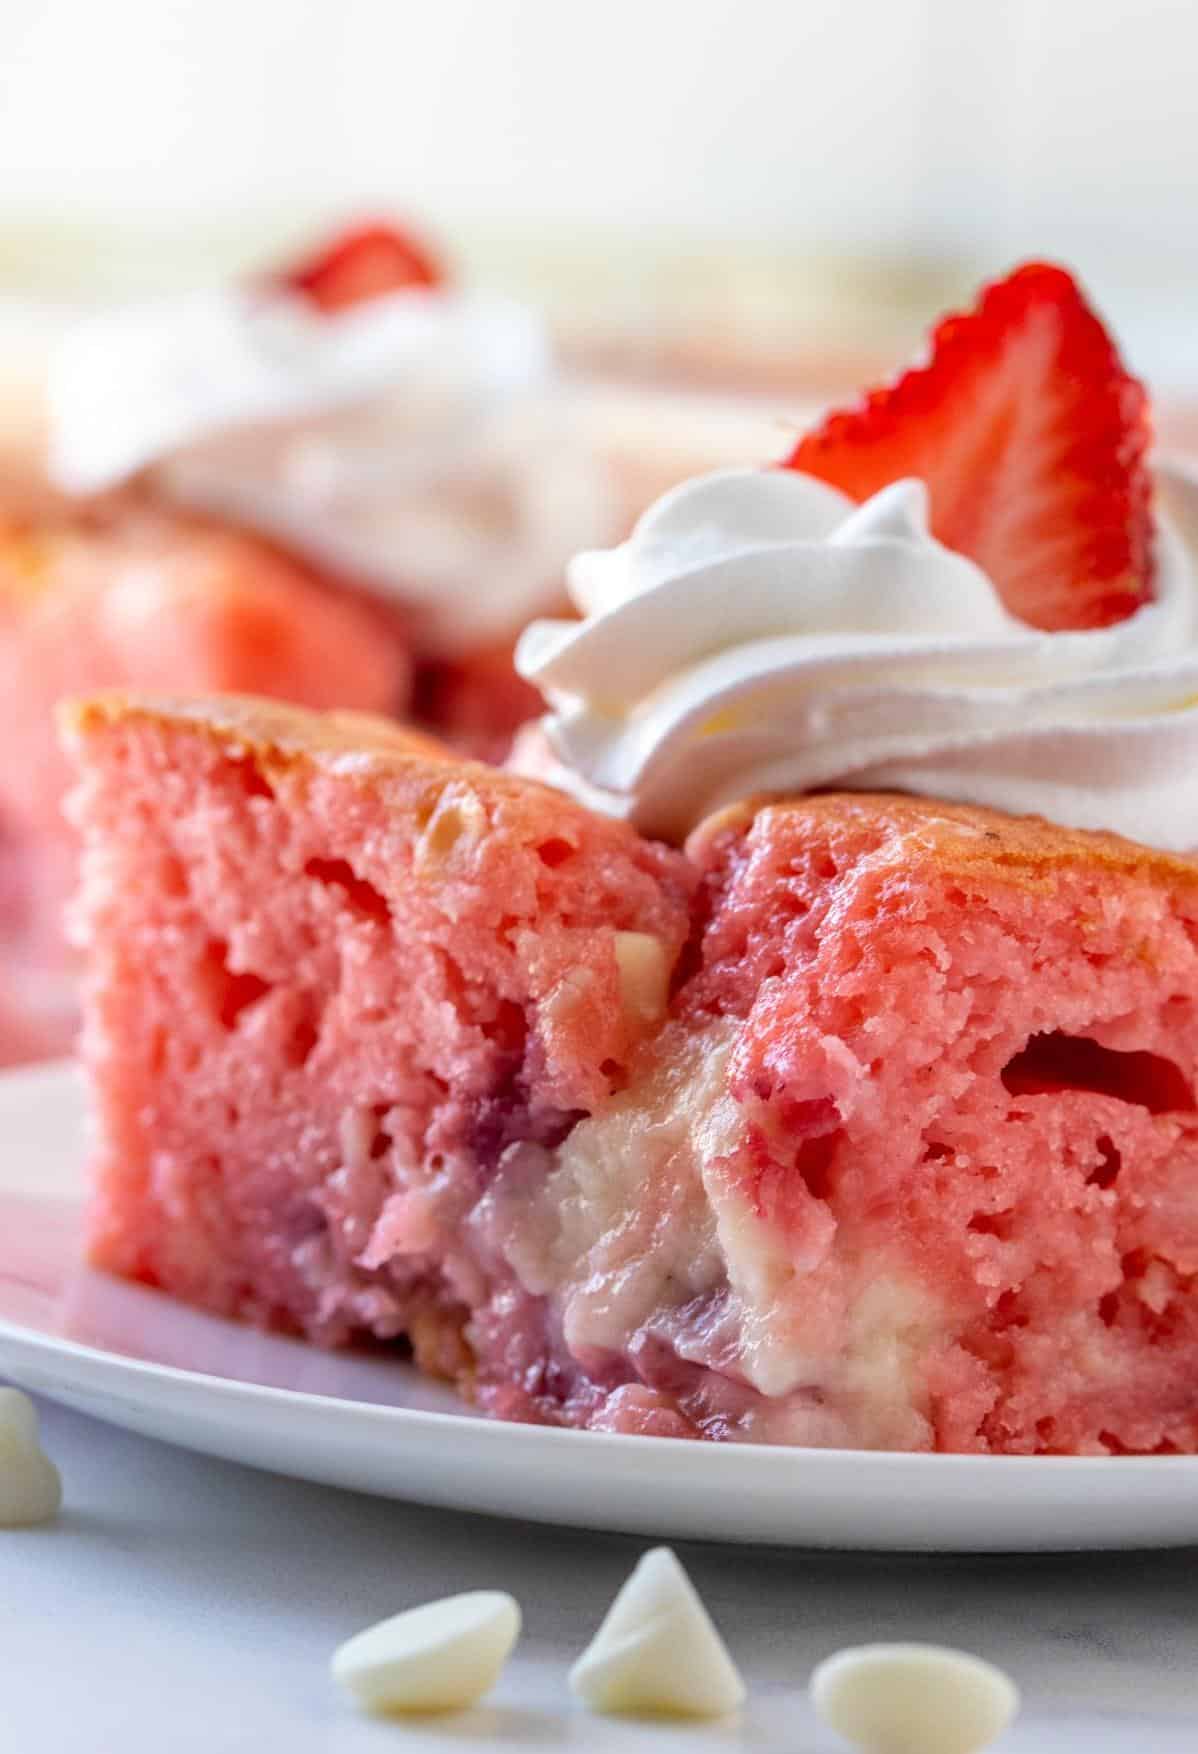  Get ready to experience an earthquake in your mouth with every bite of this delicious strawberry cake!